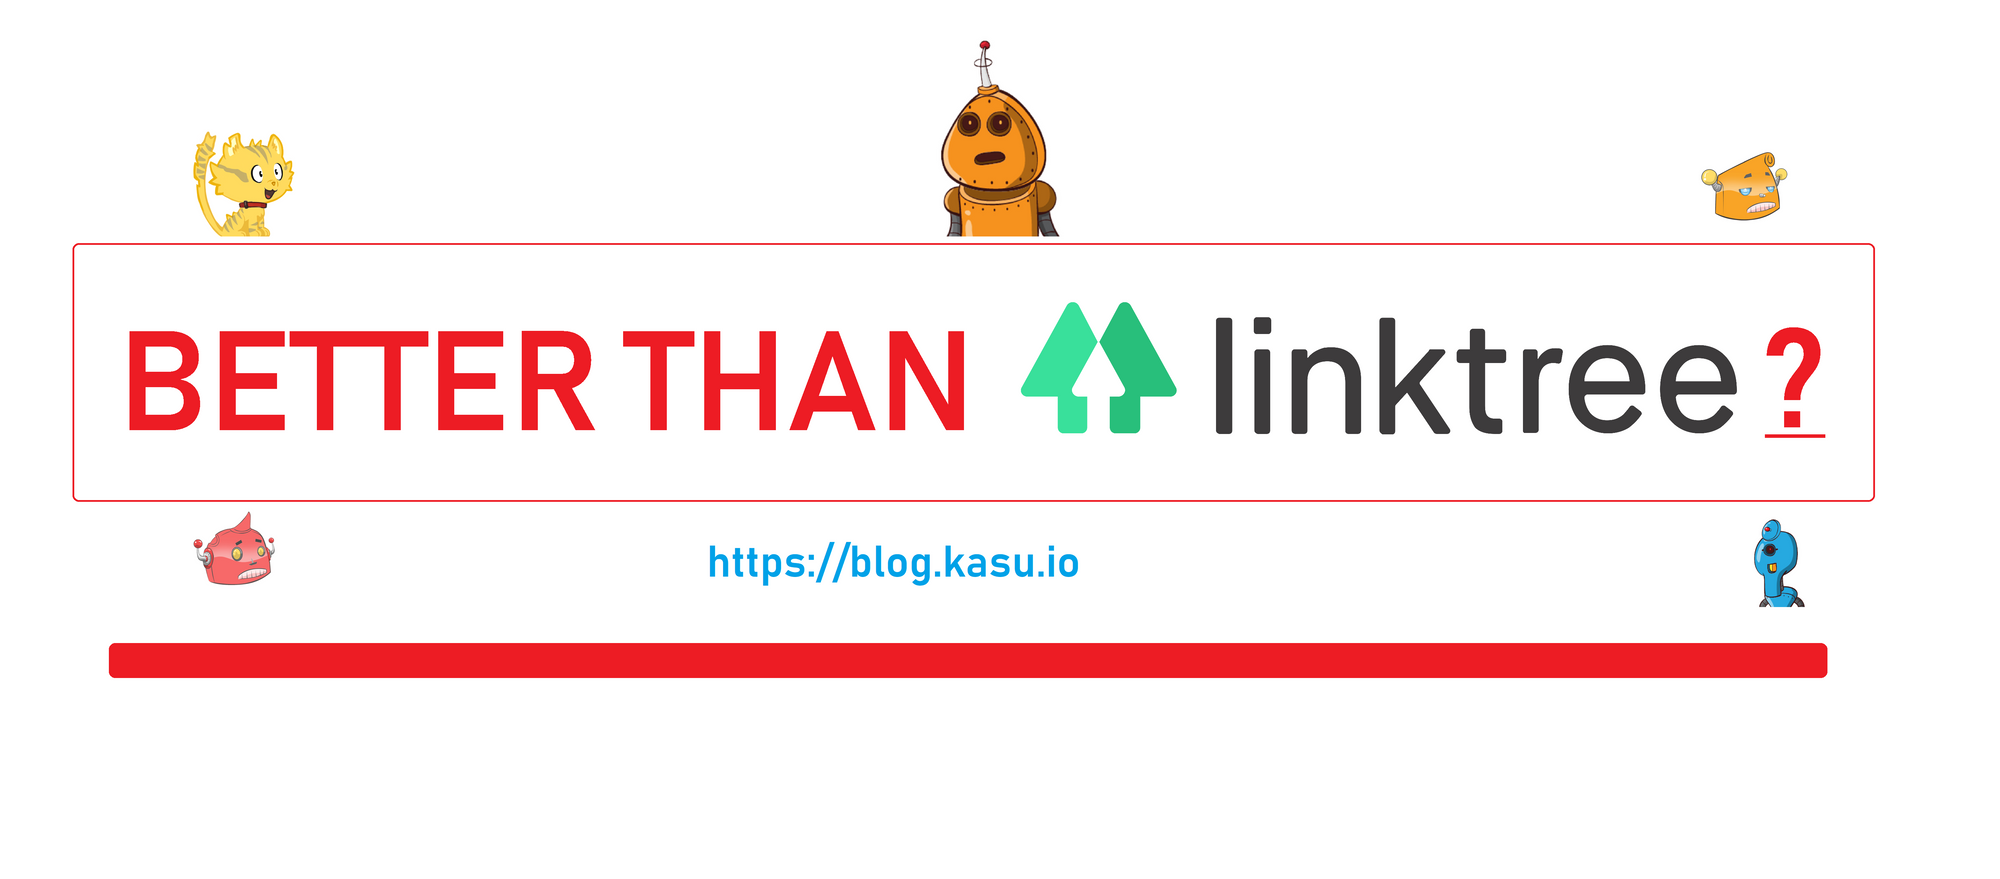 What is better than LinkTree?